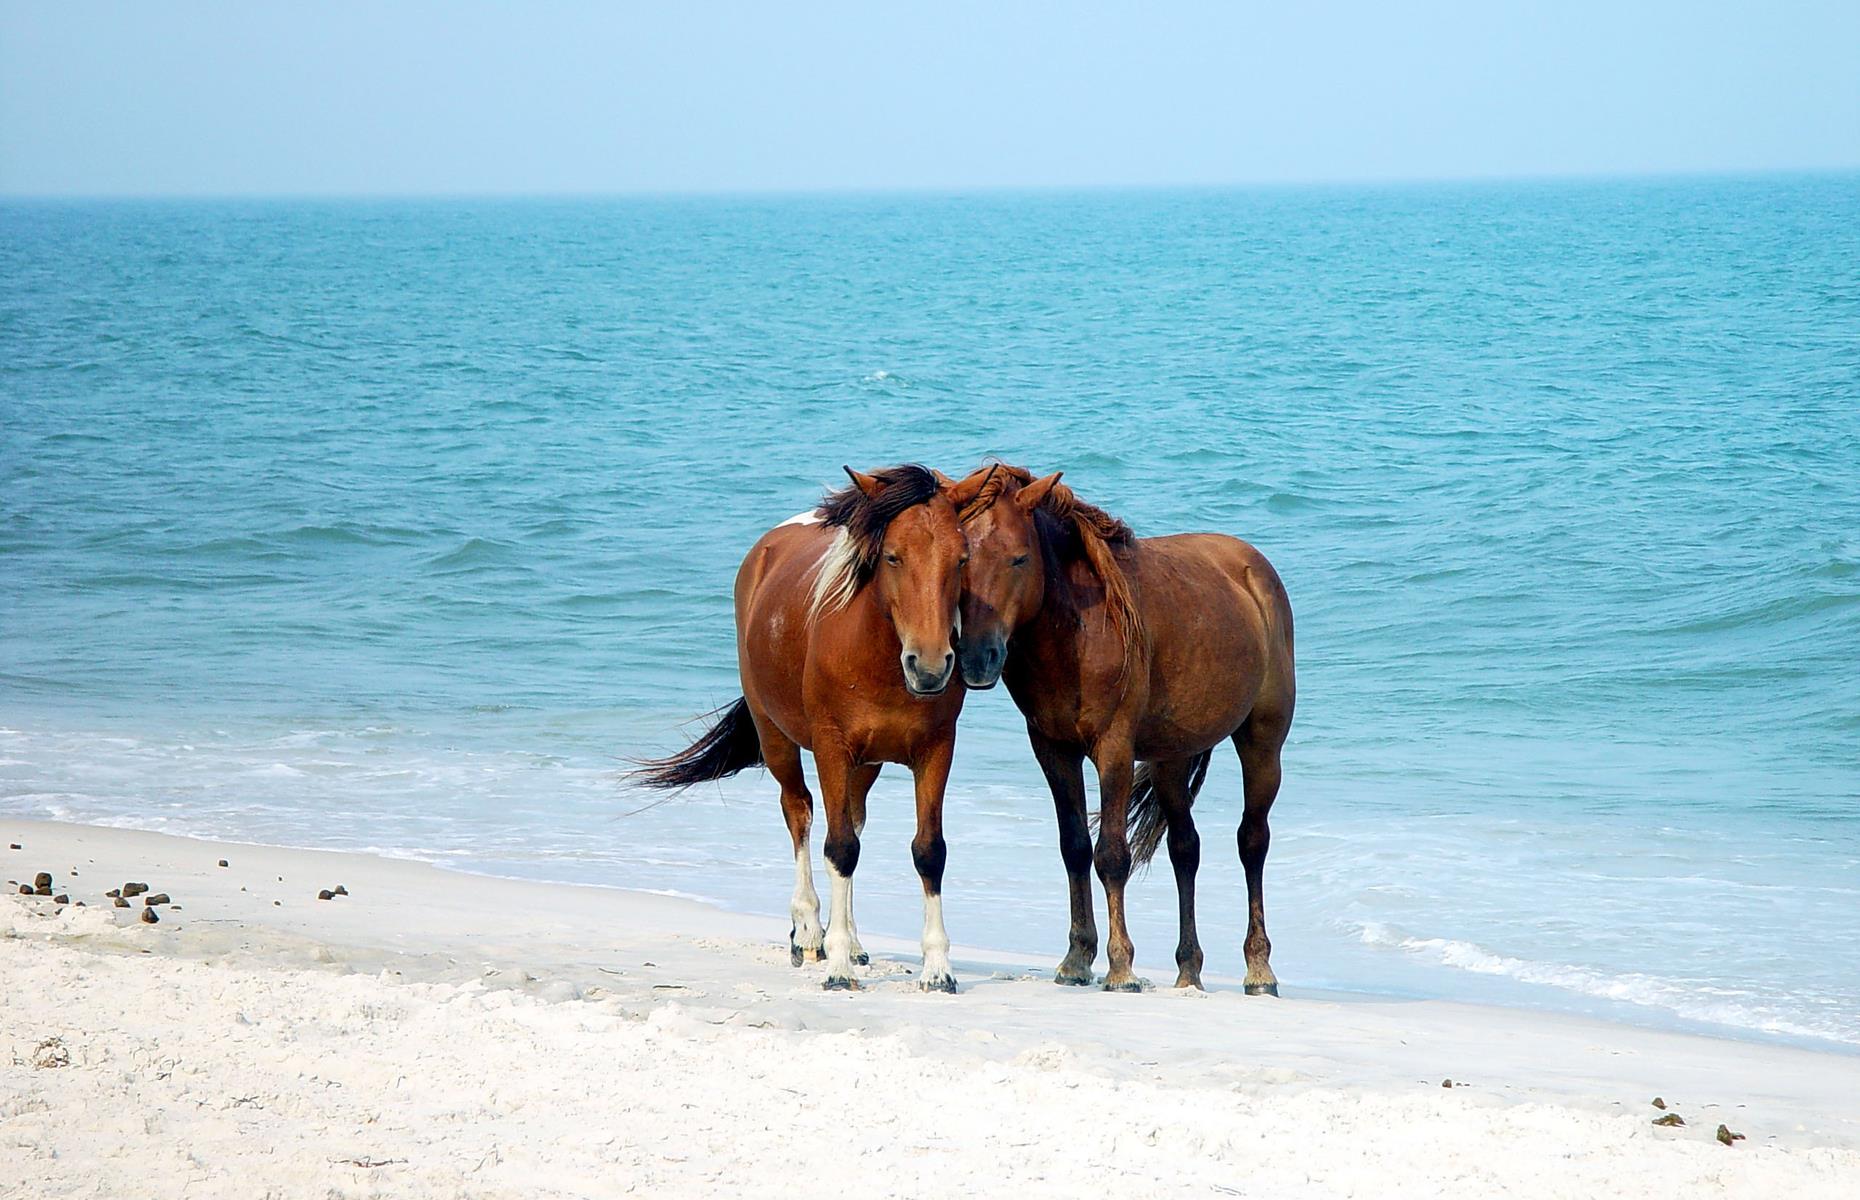 <p>This barrier island straddles Maryland and Virginia and <a href="https://www.nps.gov/asis/learn/nature/horses.htm">wild horses</a> roam on the soft, biscuity beaches, munching on dune grass and sometimes splashing in the water. Take a cruise or kayak tour to see the elegant equine creatures from a safe distance.</p>  <p><a href="http://www.loveexploring.com/galleries/84568/unspoiled-american-destinations-to-escape-the-modern-world"><strong>Read our guide to remote destinations around the US</strong></a></p>